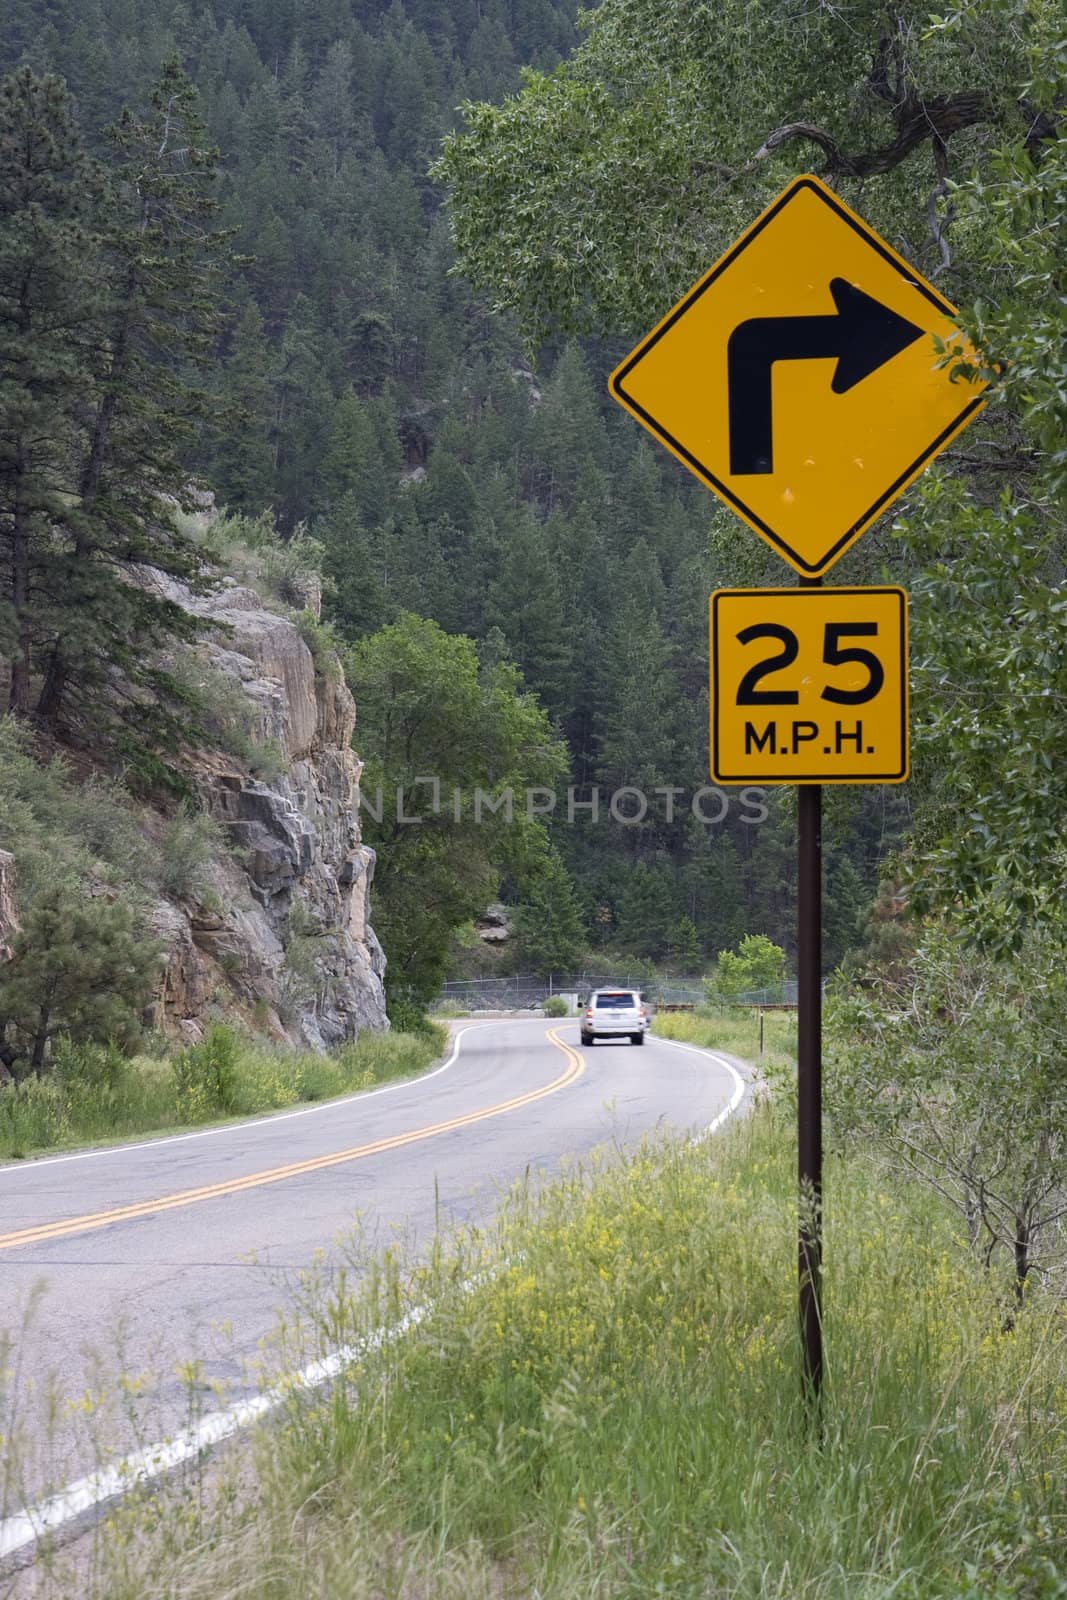 25 mph advised speed - approaching sharp turning on a mountain road